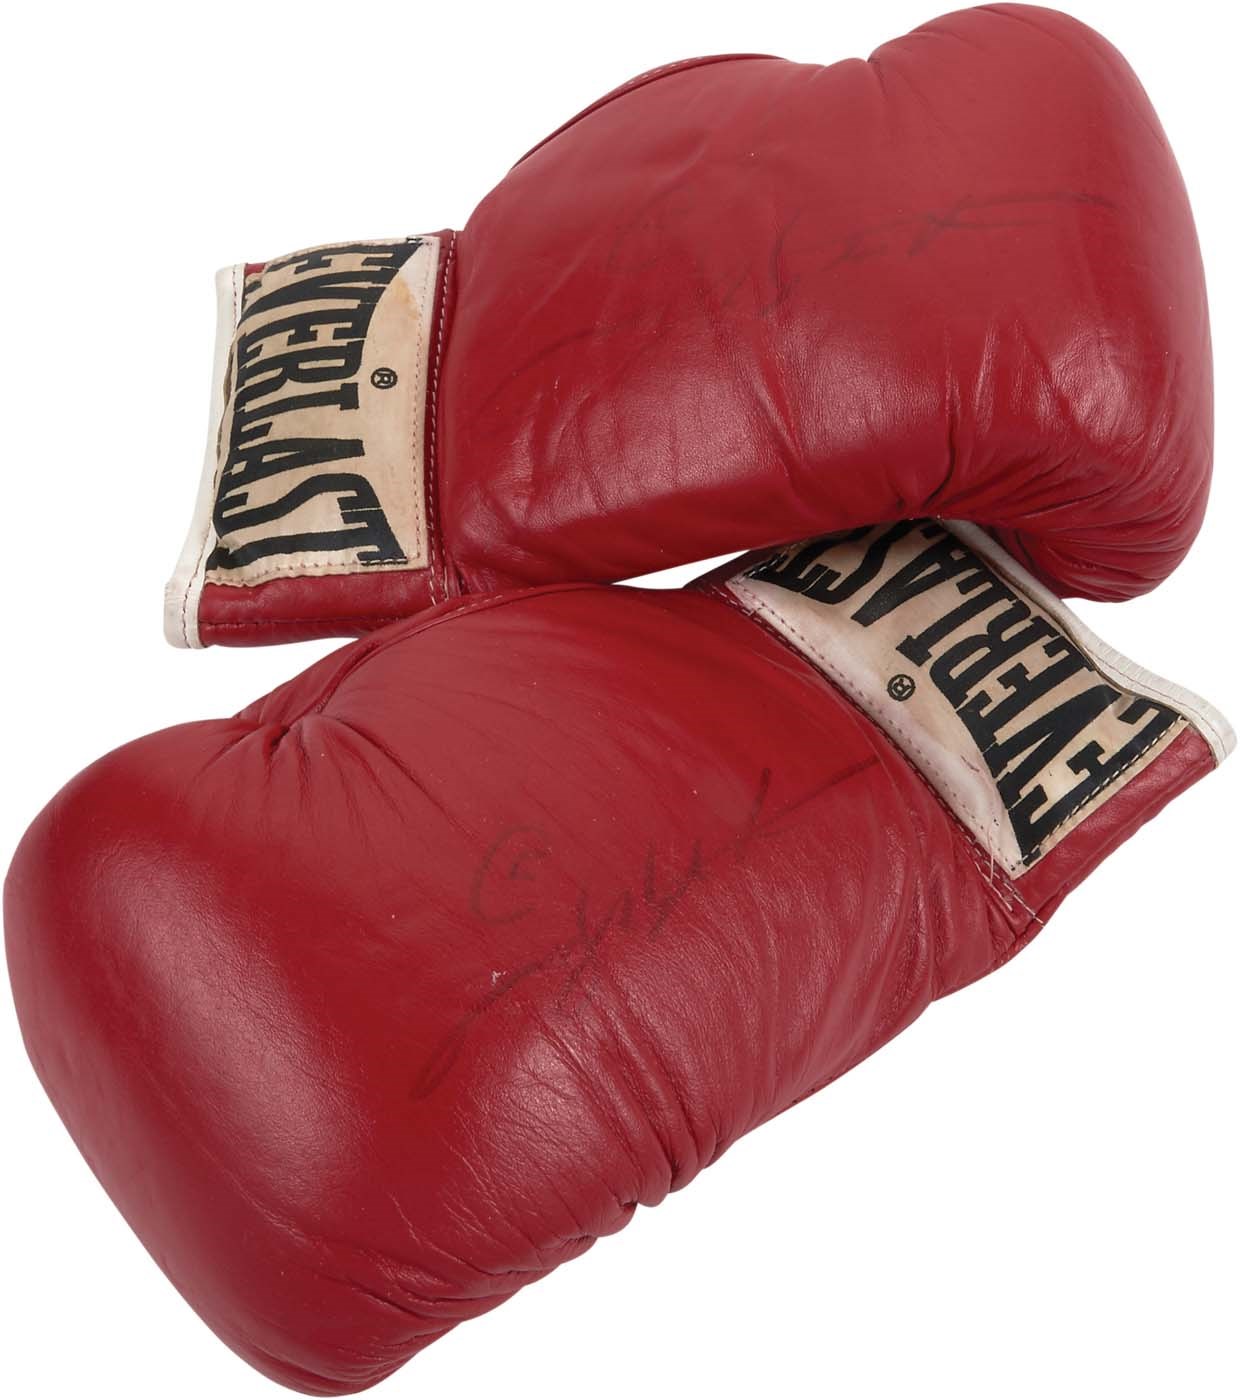 - 1977 Sugar Ray Leonard Pro Debut Signed Fight Gloves (Photo-Matched)